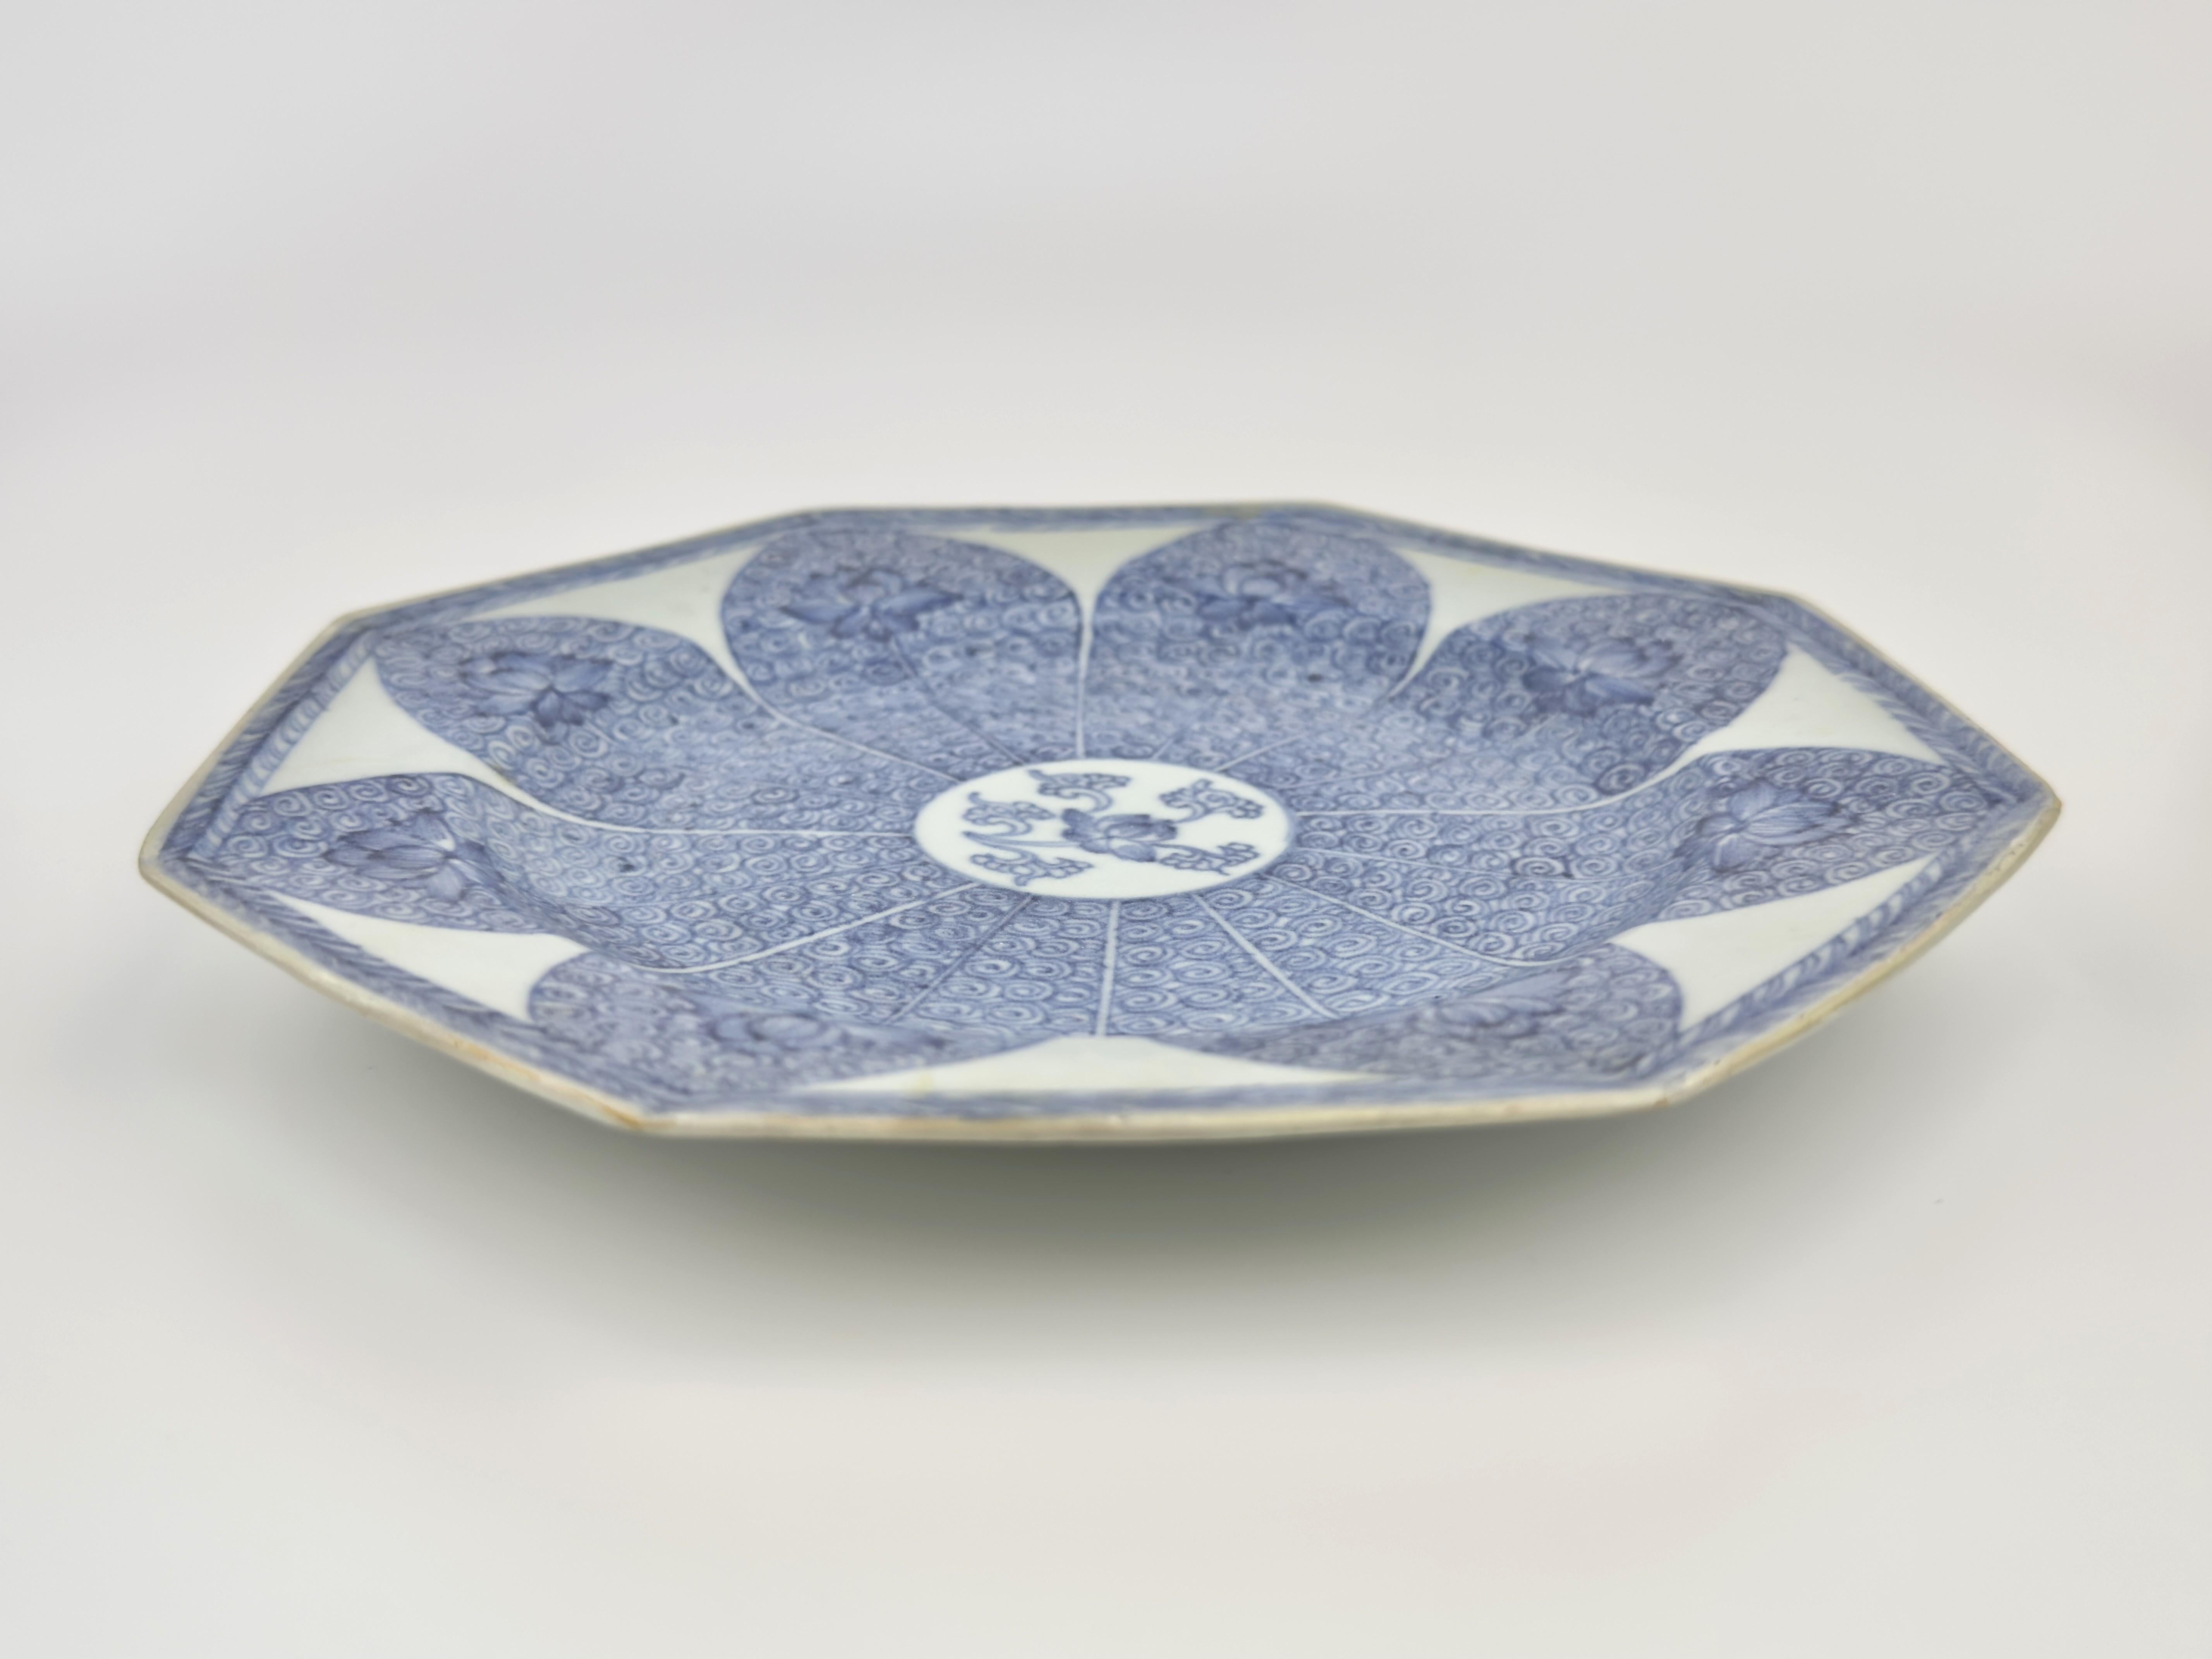 Chinoiserie 'Lotus' Pattern Blue and White Dish c. 1725, Qing Dynasty, Yongzheng Era For Sale